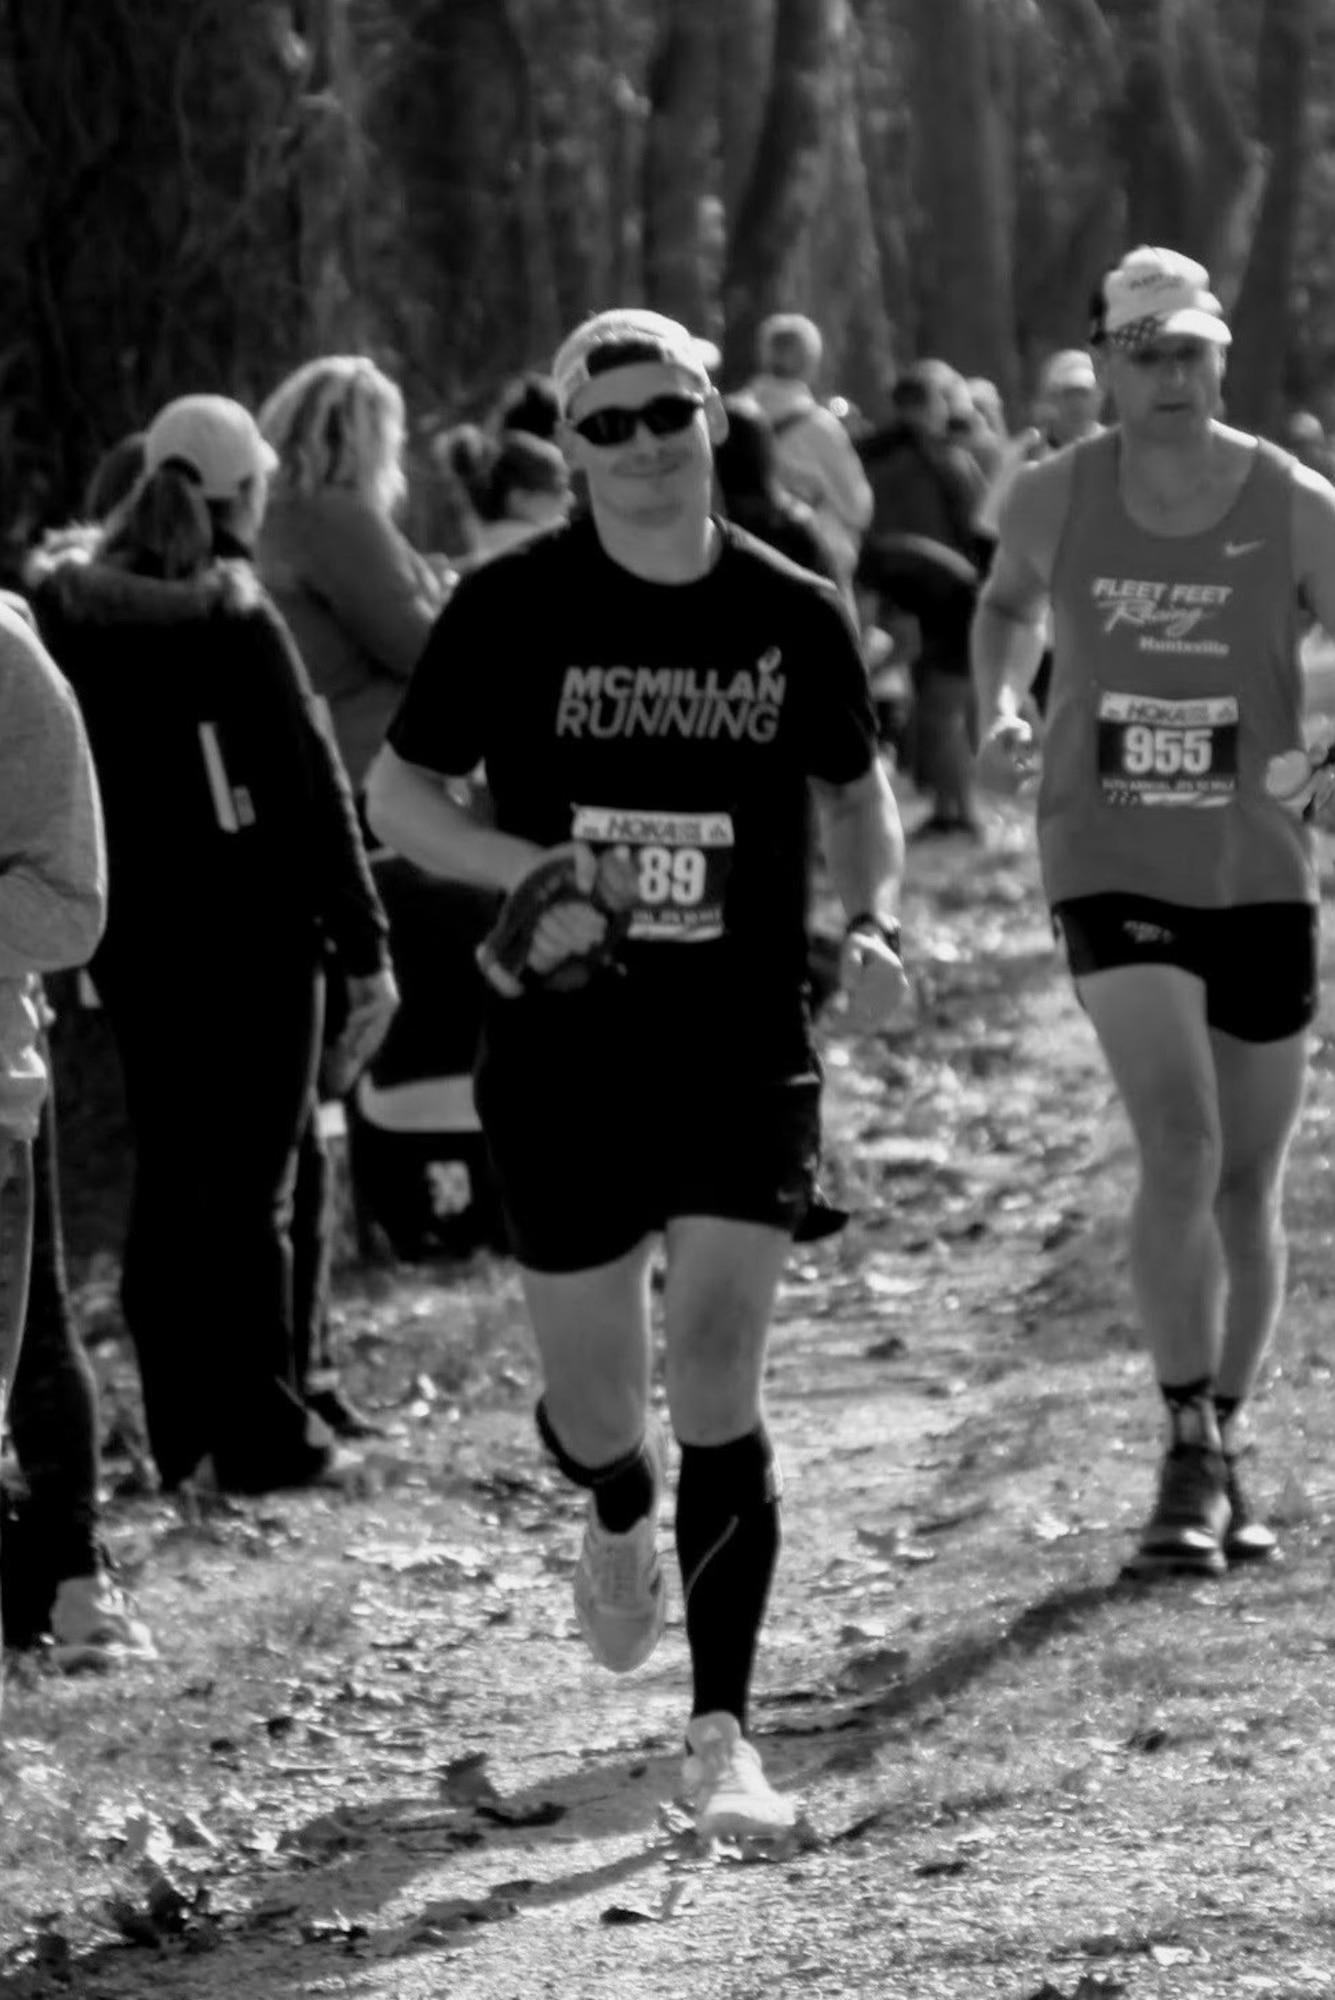 U.S. Air Force Lt. Col. Paul Gesl, , Space Launch Delta 30 30th Staff Judge Advocate, races in the 2016 JFK 50-miler in Boonsboro, Maryland. The JFK 50-miler was Gesl’s first 50 mile race of his running career. (Courtesy photo from Lt. Col. Paul Gesl)